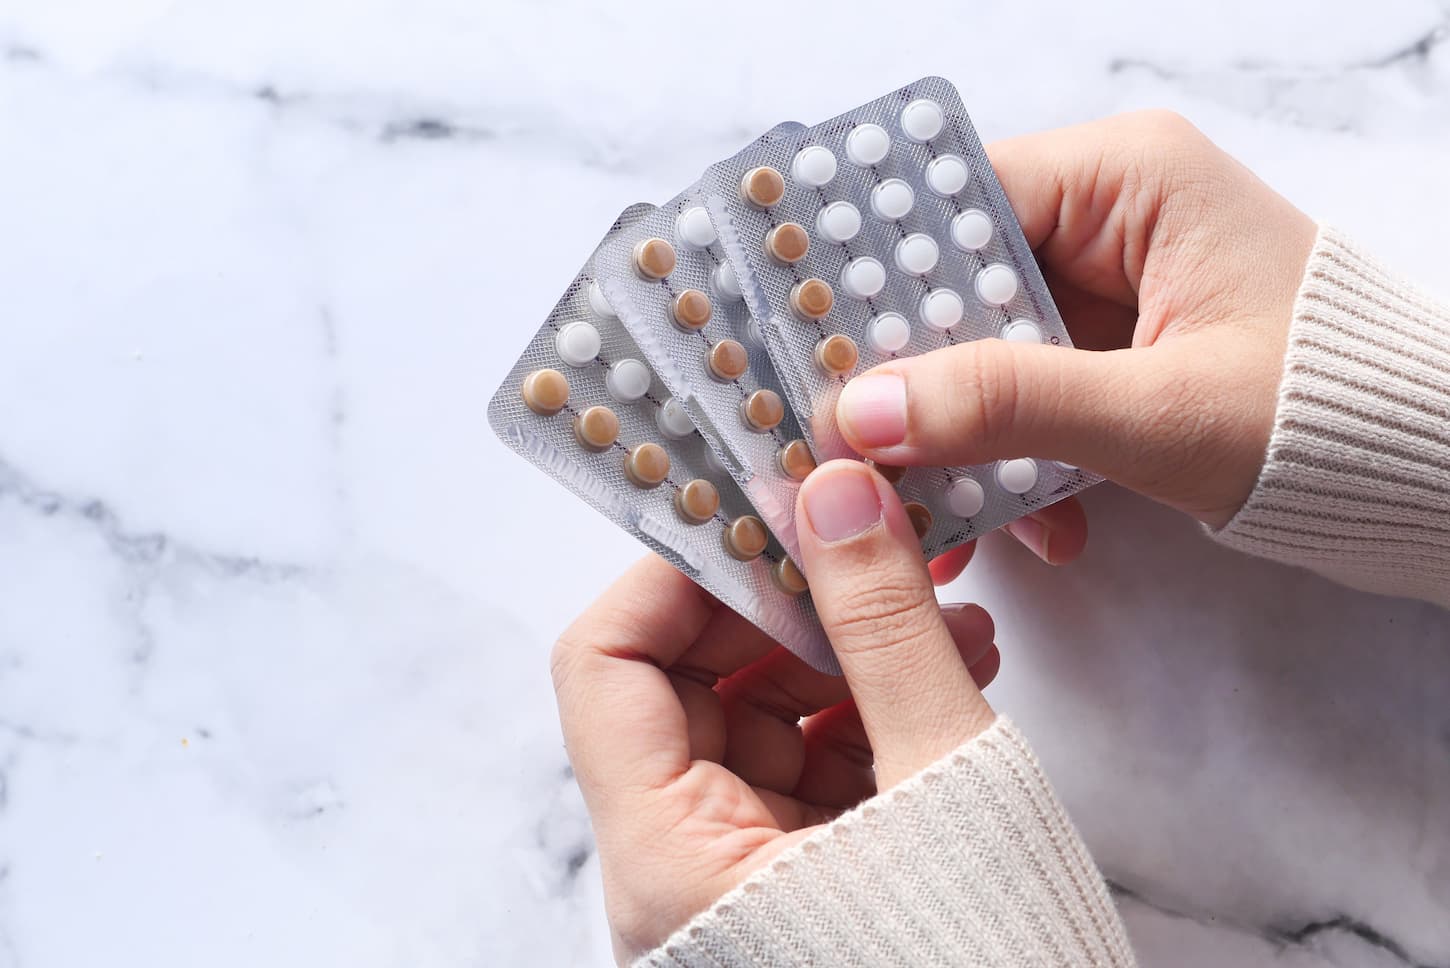 Studies Indicate Contraceptive Benefits Correlate with Abortion Rates